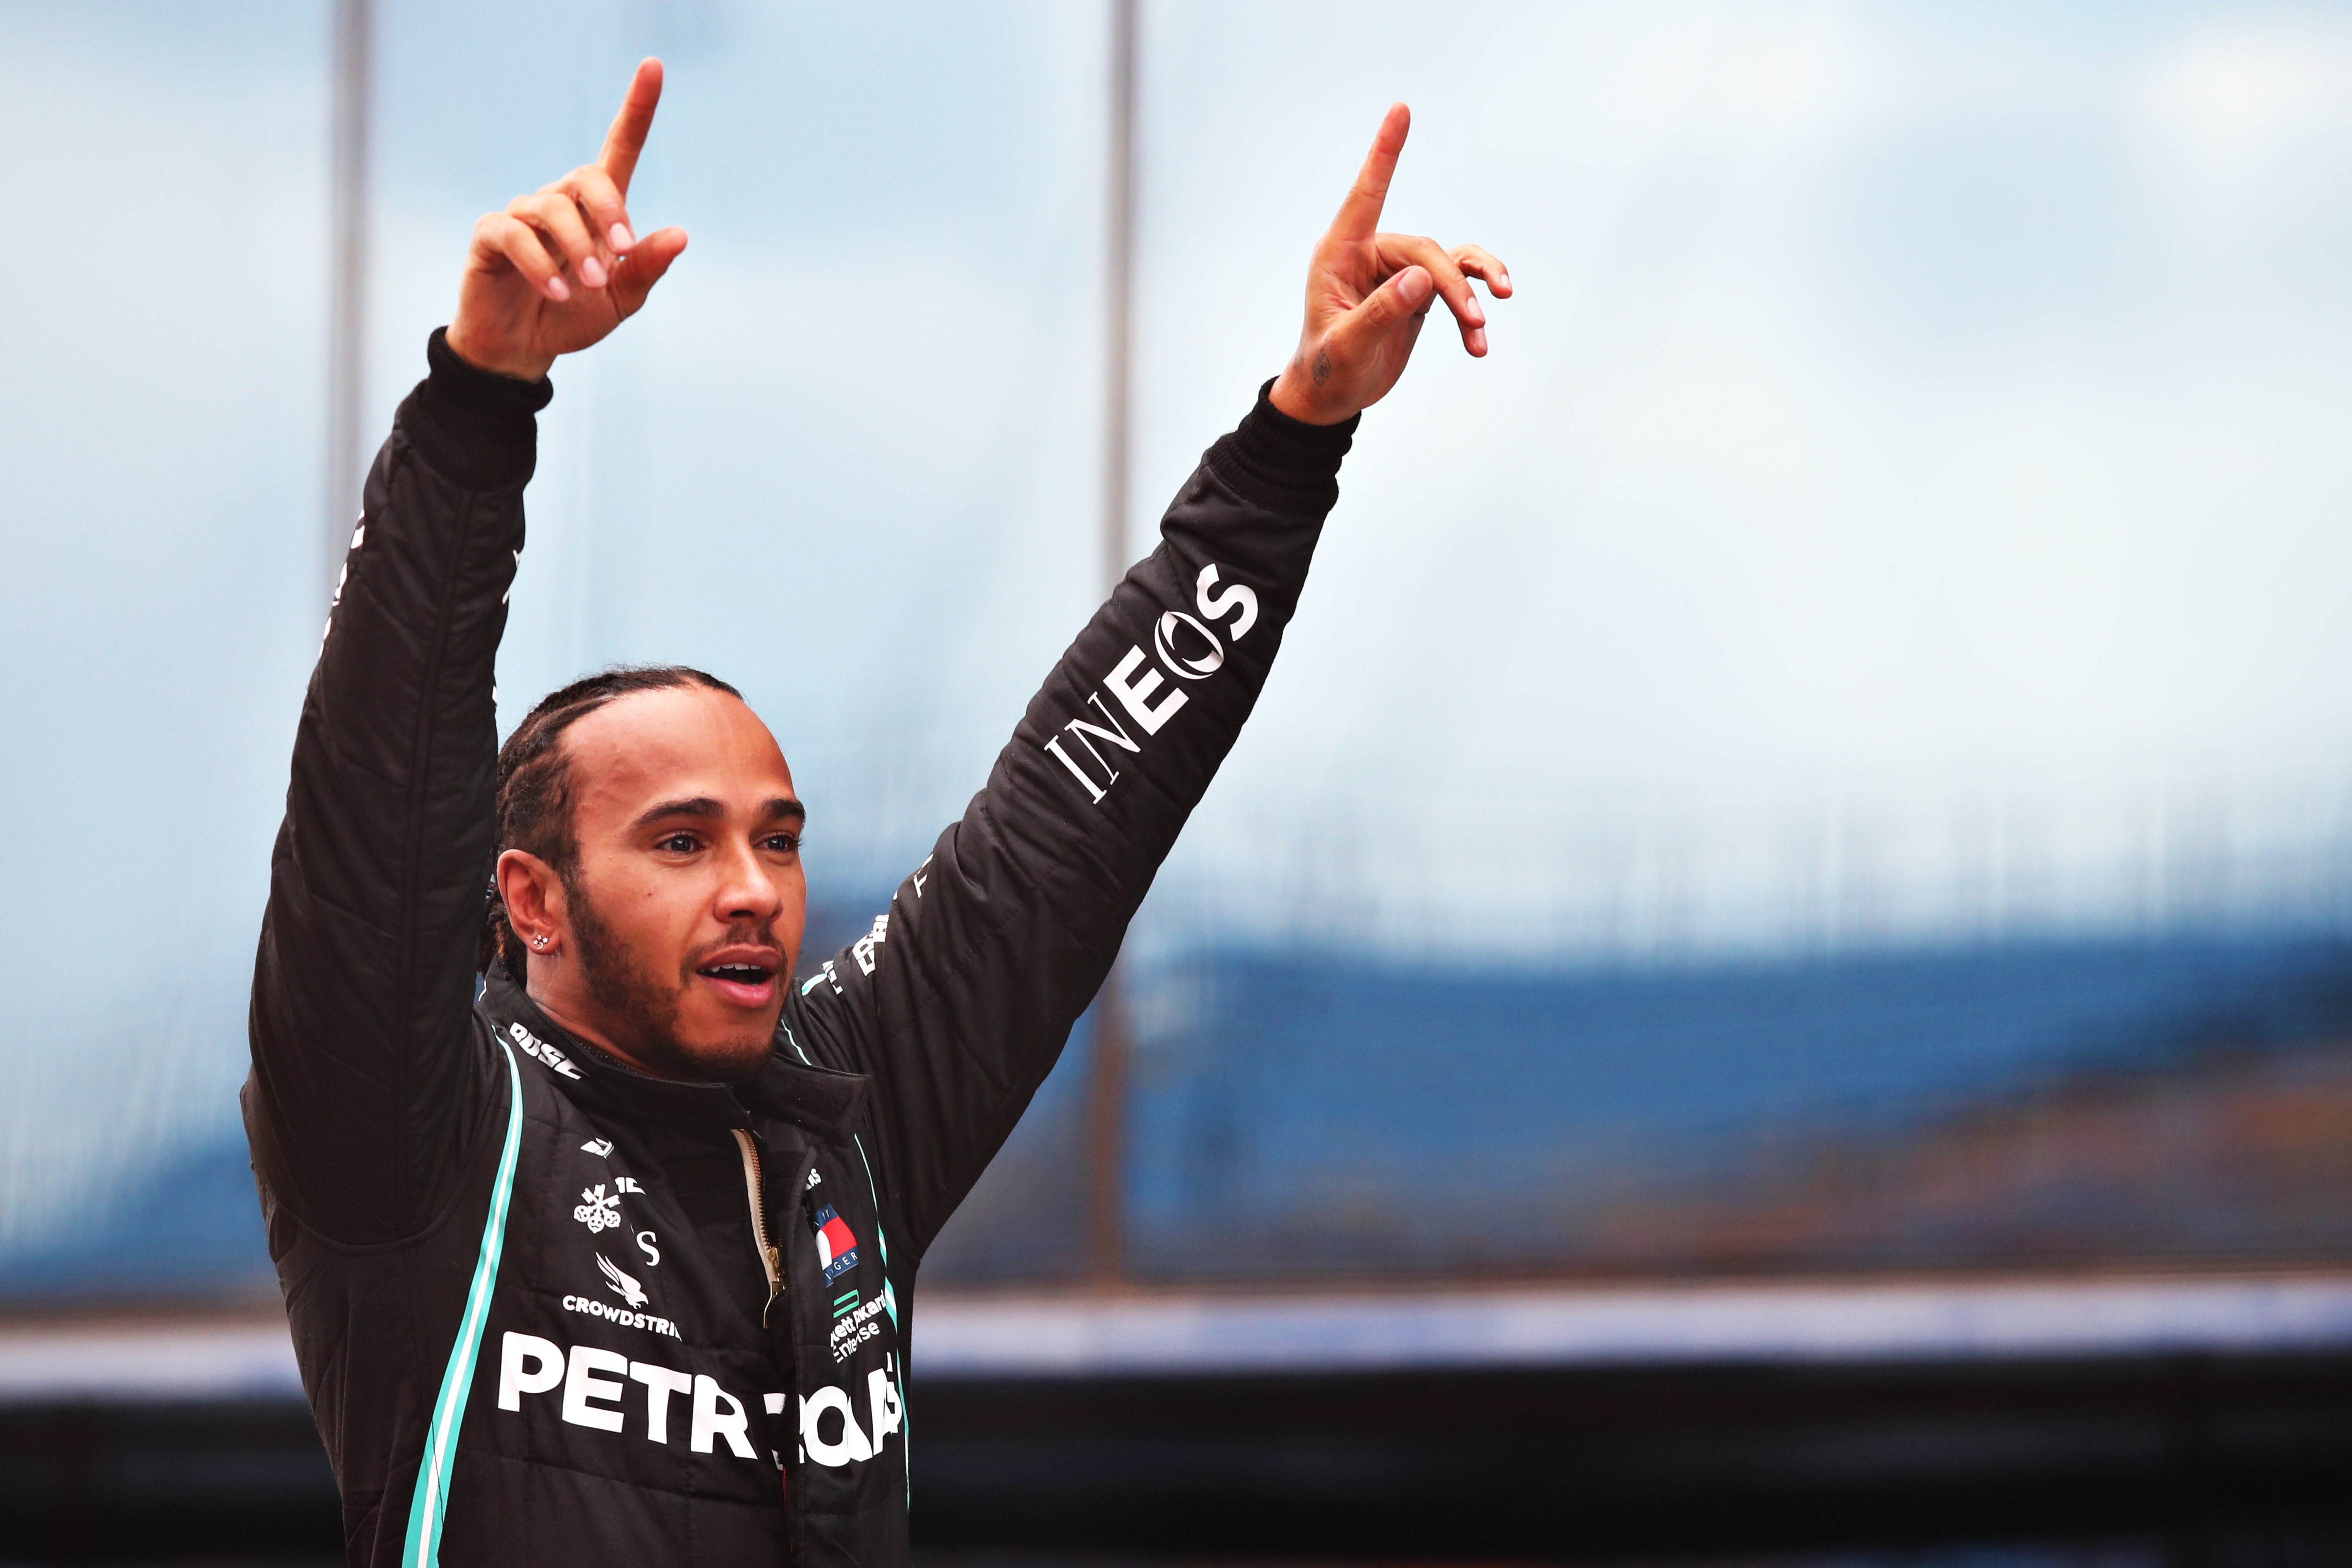 Mercedes GP racer Lewis Hamilton celebrating after winning 7th F1 World Drivers Championship at Intercity Istanbul Park in Istanbul, Turkey | Photo: Tolga Bozoglu - Pool/Getty Images